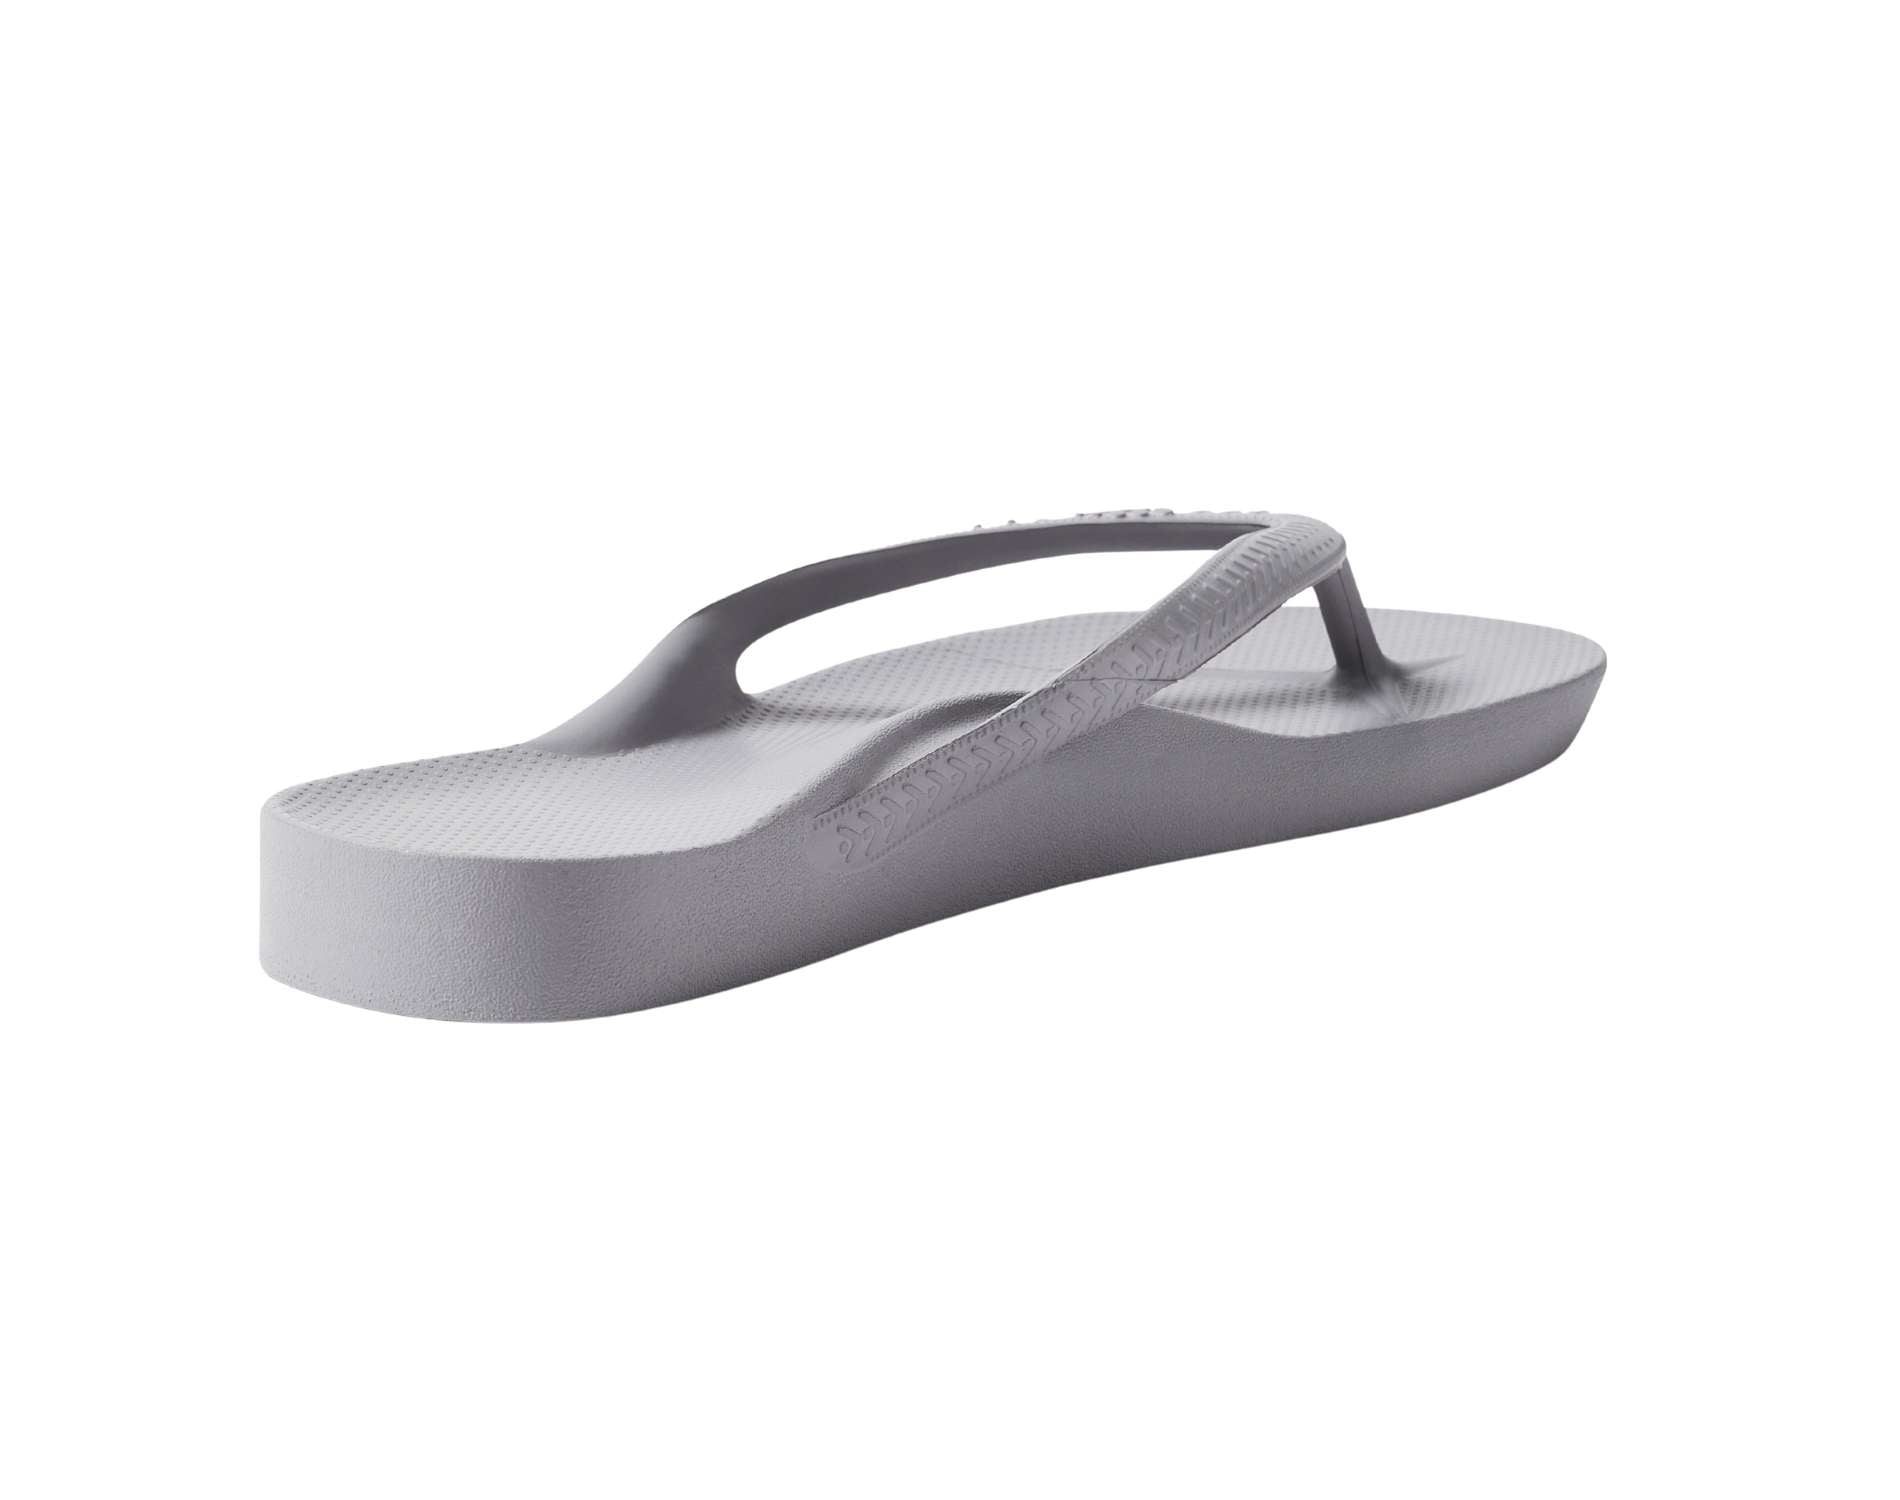 Archies arch support thongs in grey colour